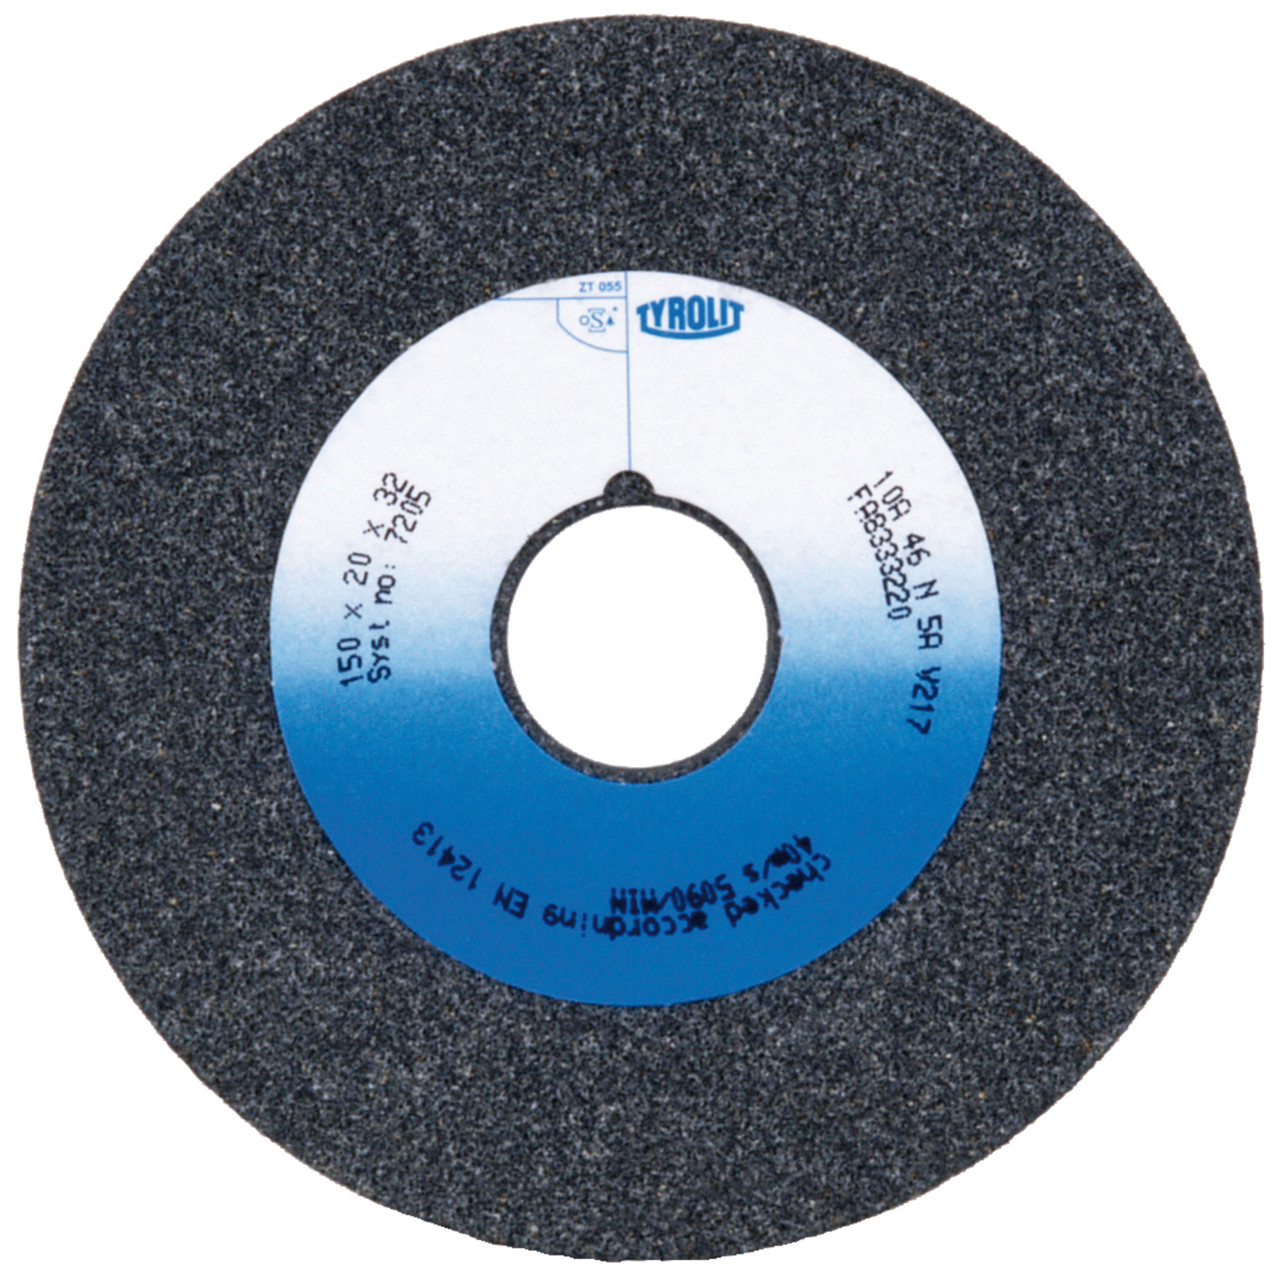 Tyrolit Conventional ceramic grinding discs DxDxH 200x20x32 For unalloyed and low-alloy steels, shape: 1, Art. 600134